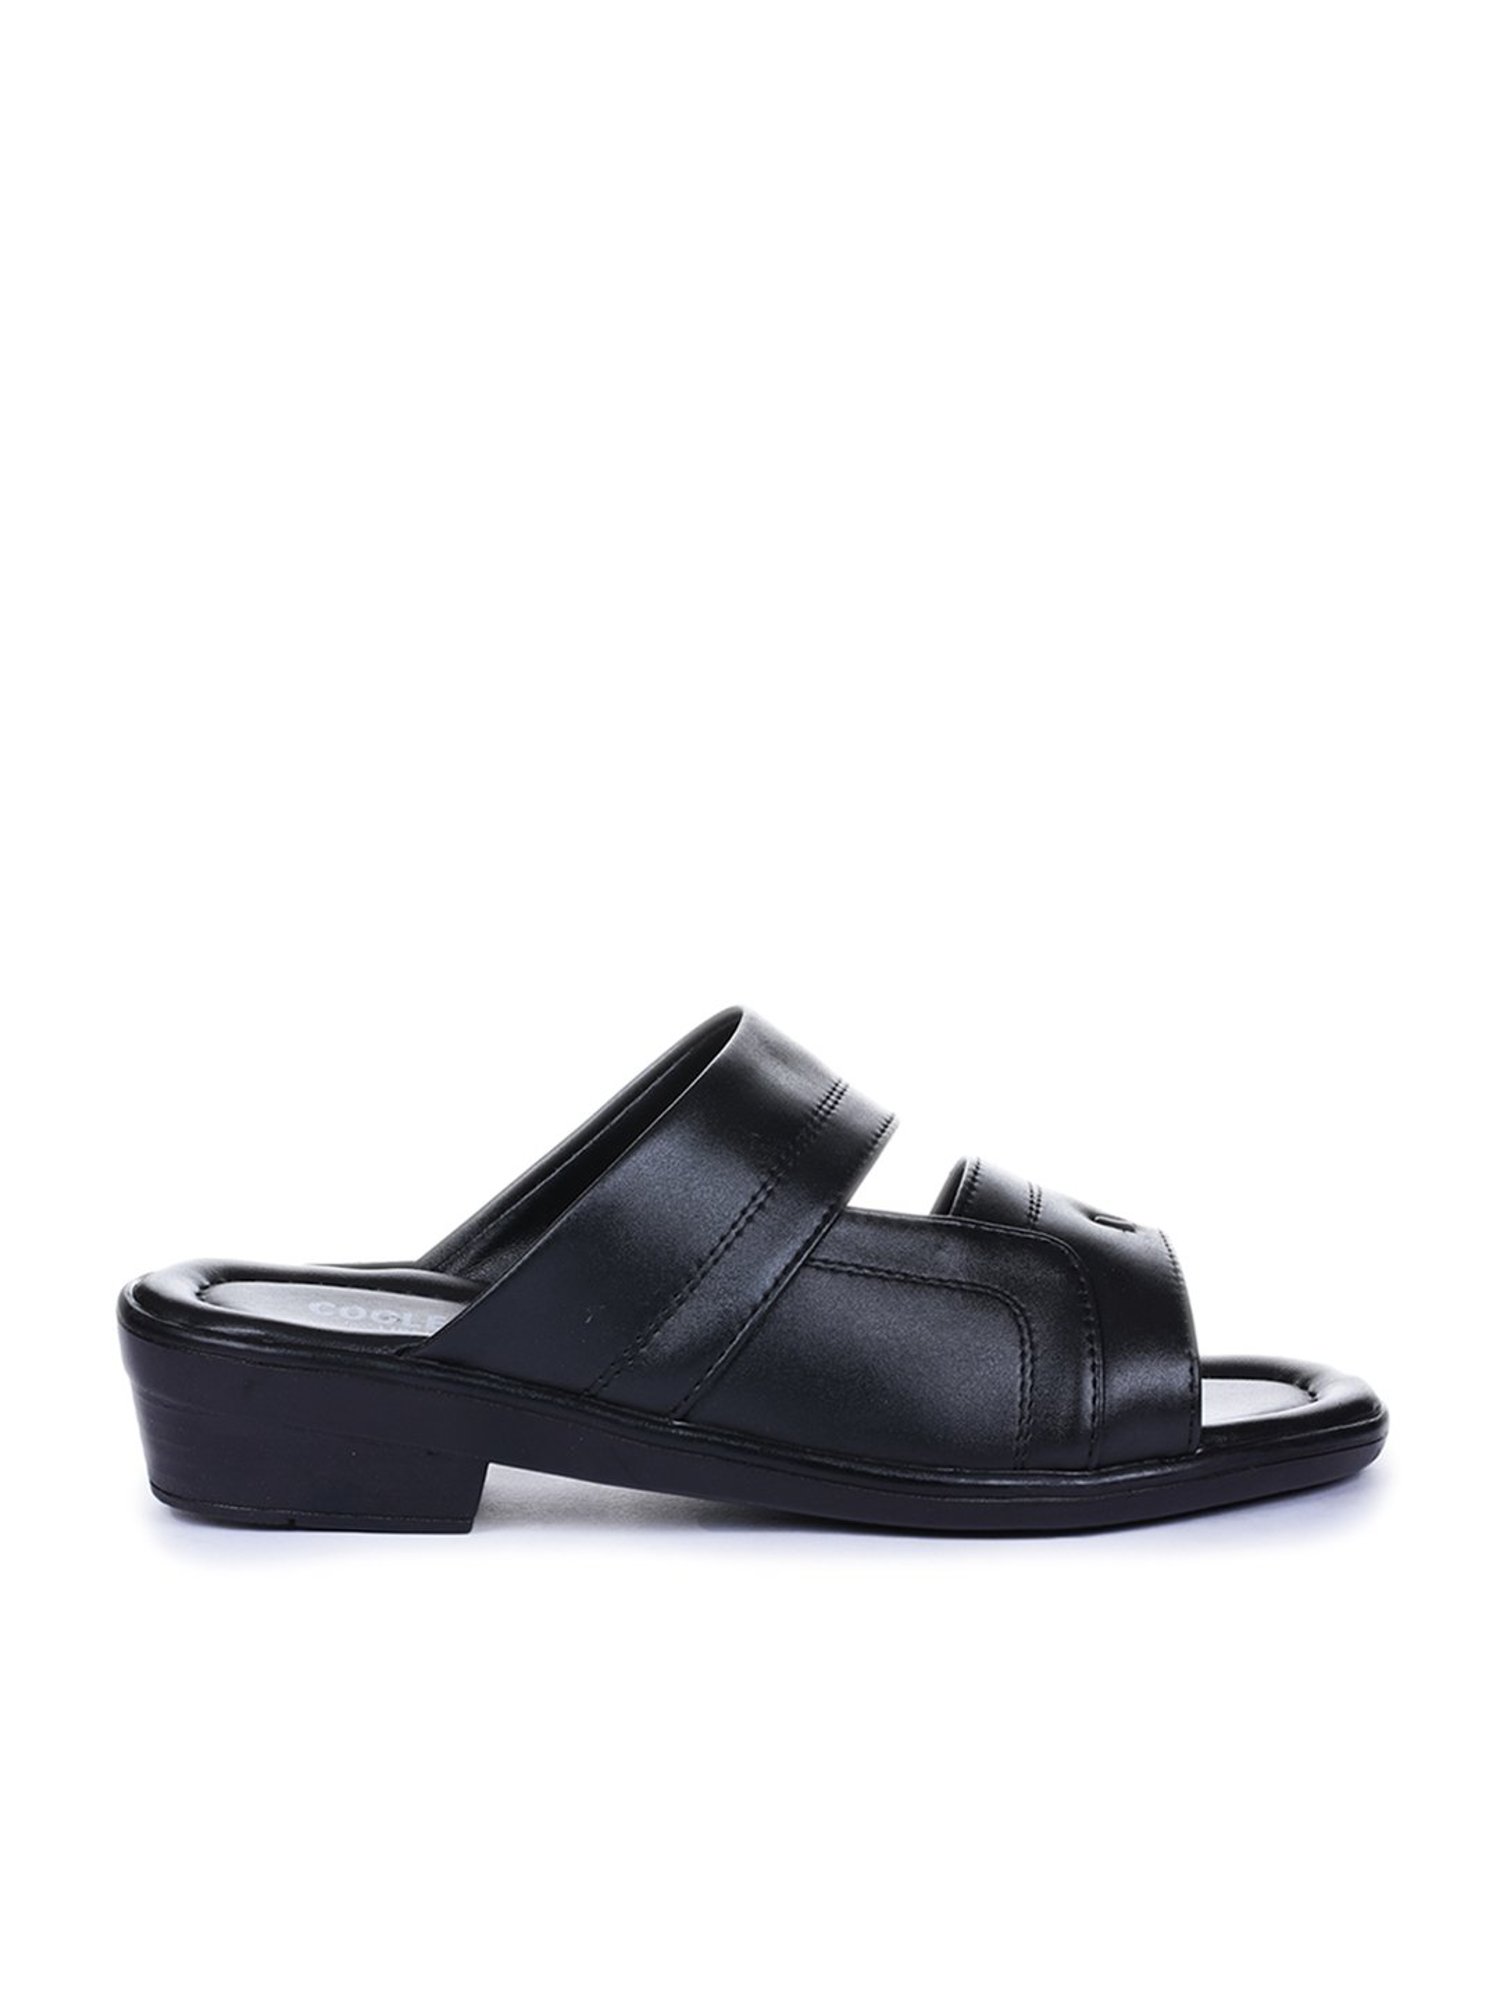 Coolers (from Liberty) Men's Black Leather Sandals and Floaters - 9 UK  (2050-12): Buy Online at Low Prices in India - Amazon.in